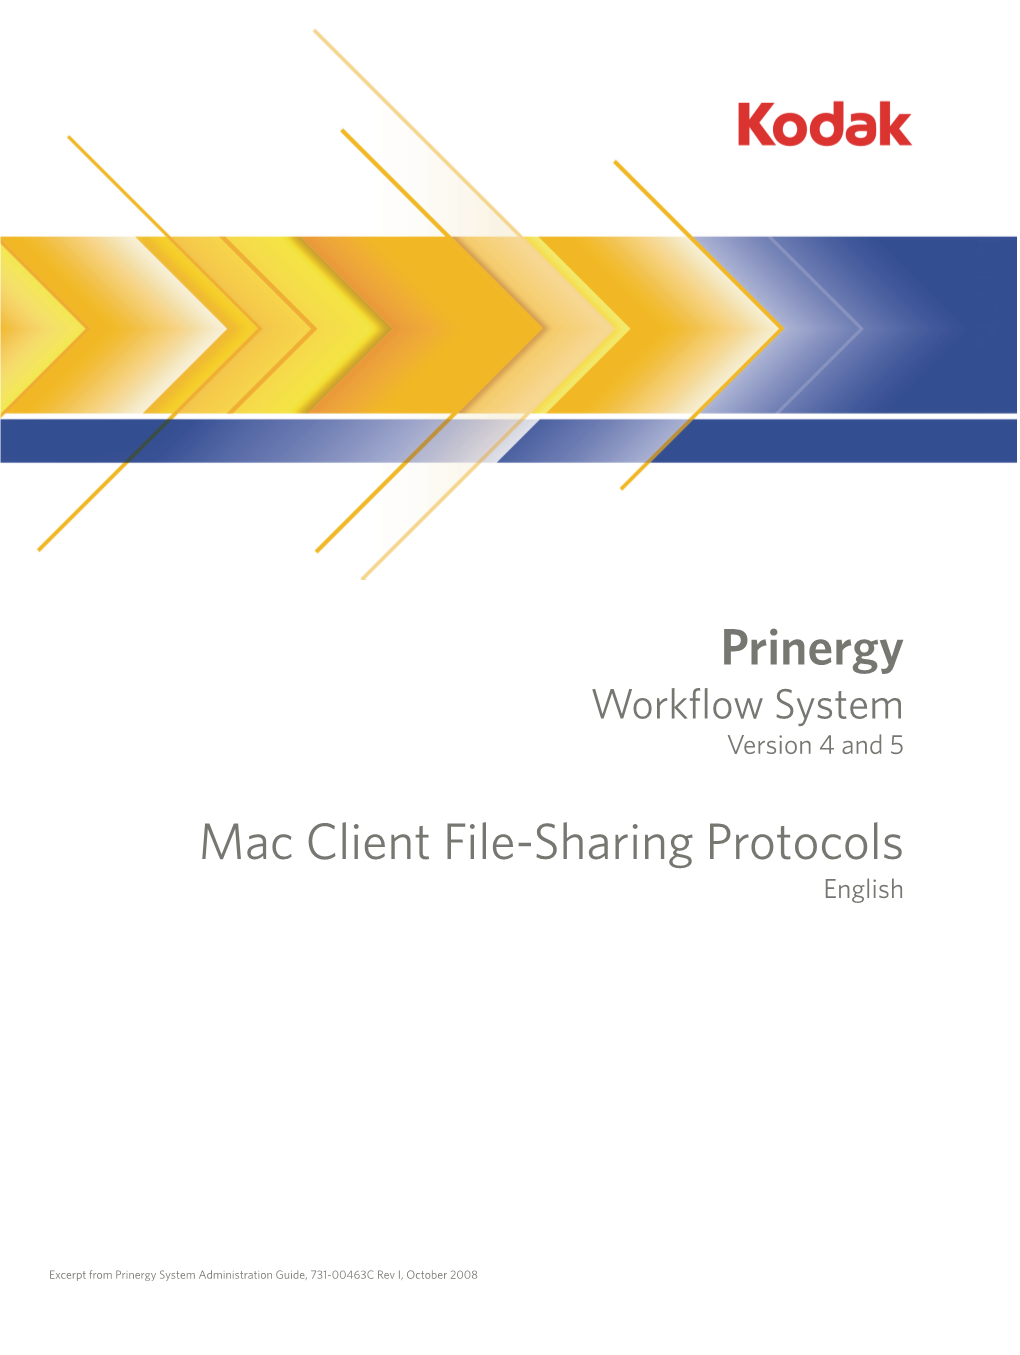 Prinergy Mac Client File-Sharing Protocols